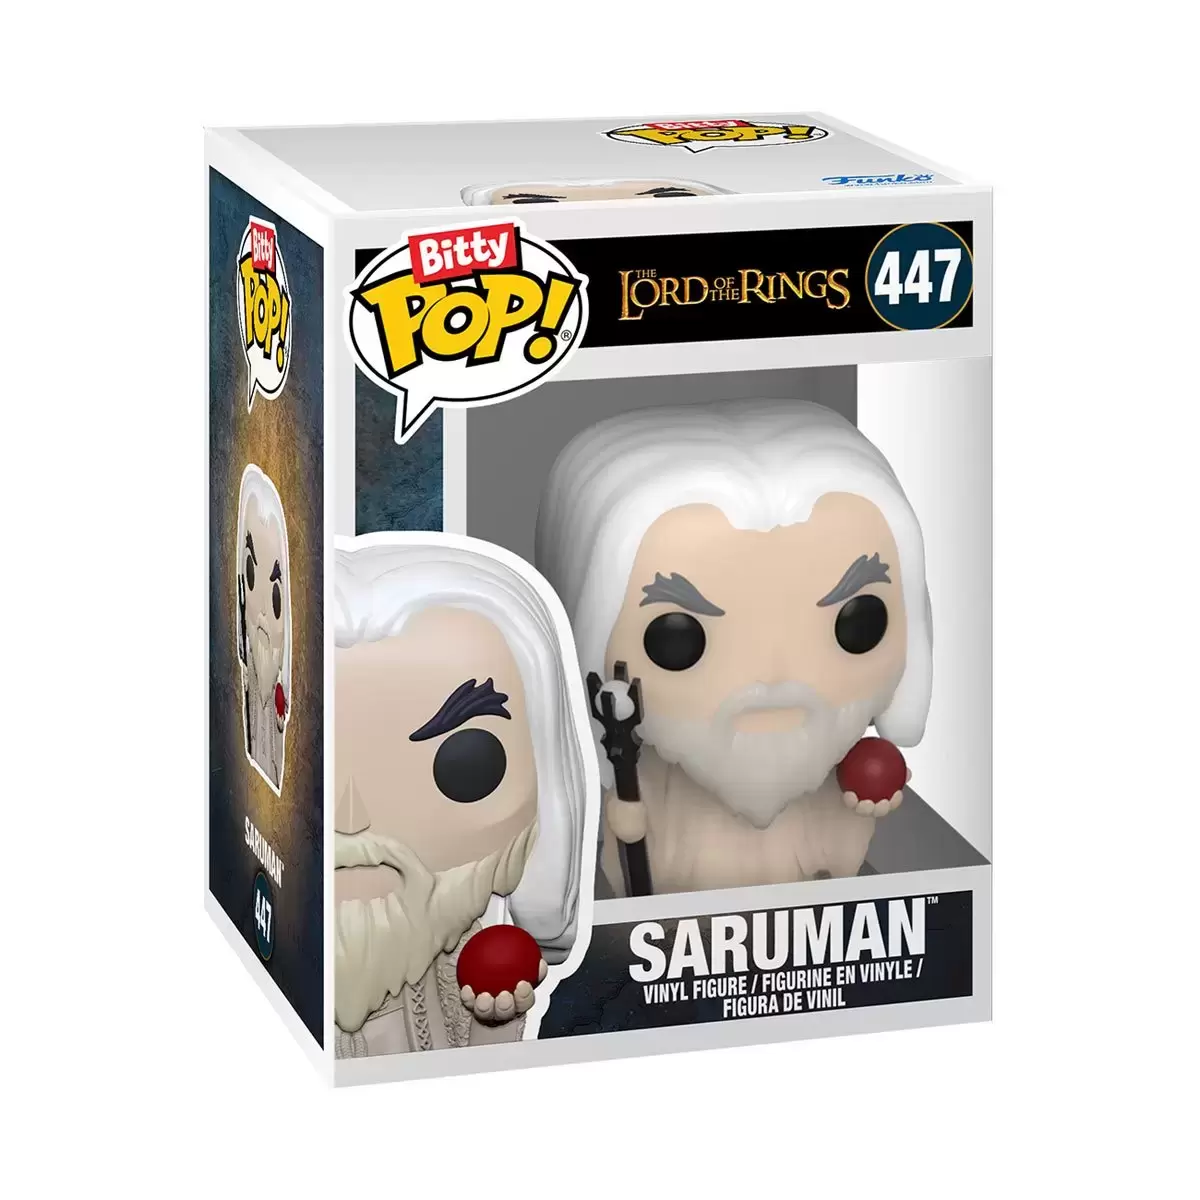 Bitty POP! - Lord of The Rings - Saruman